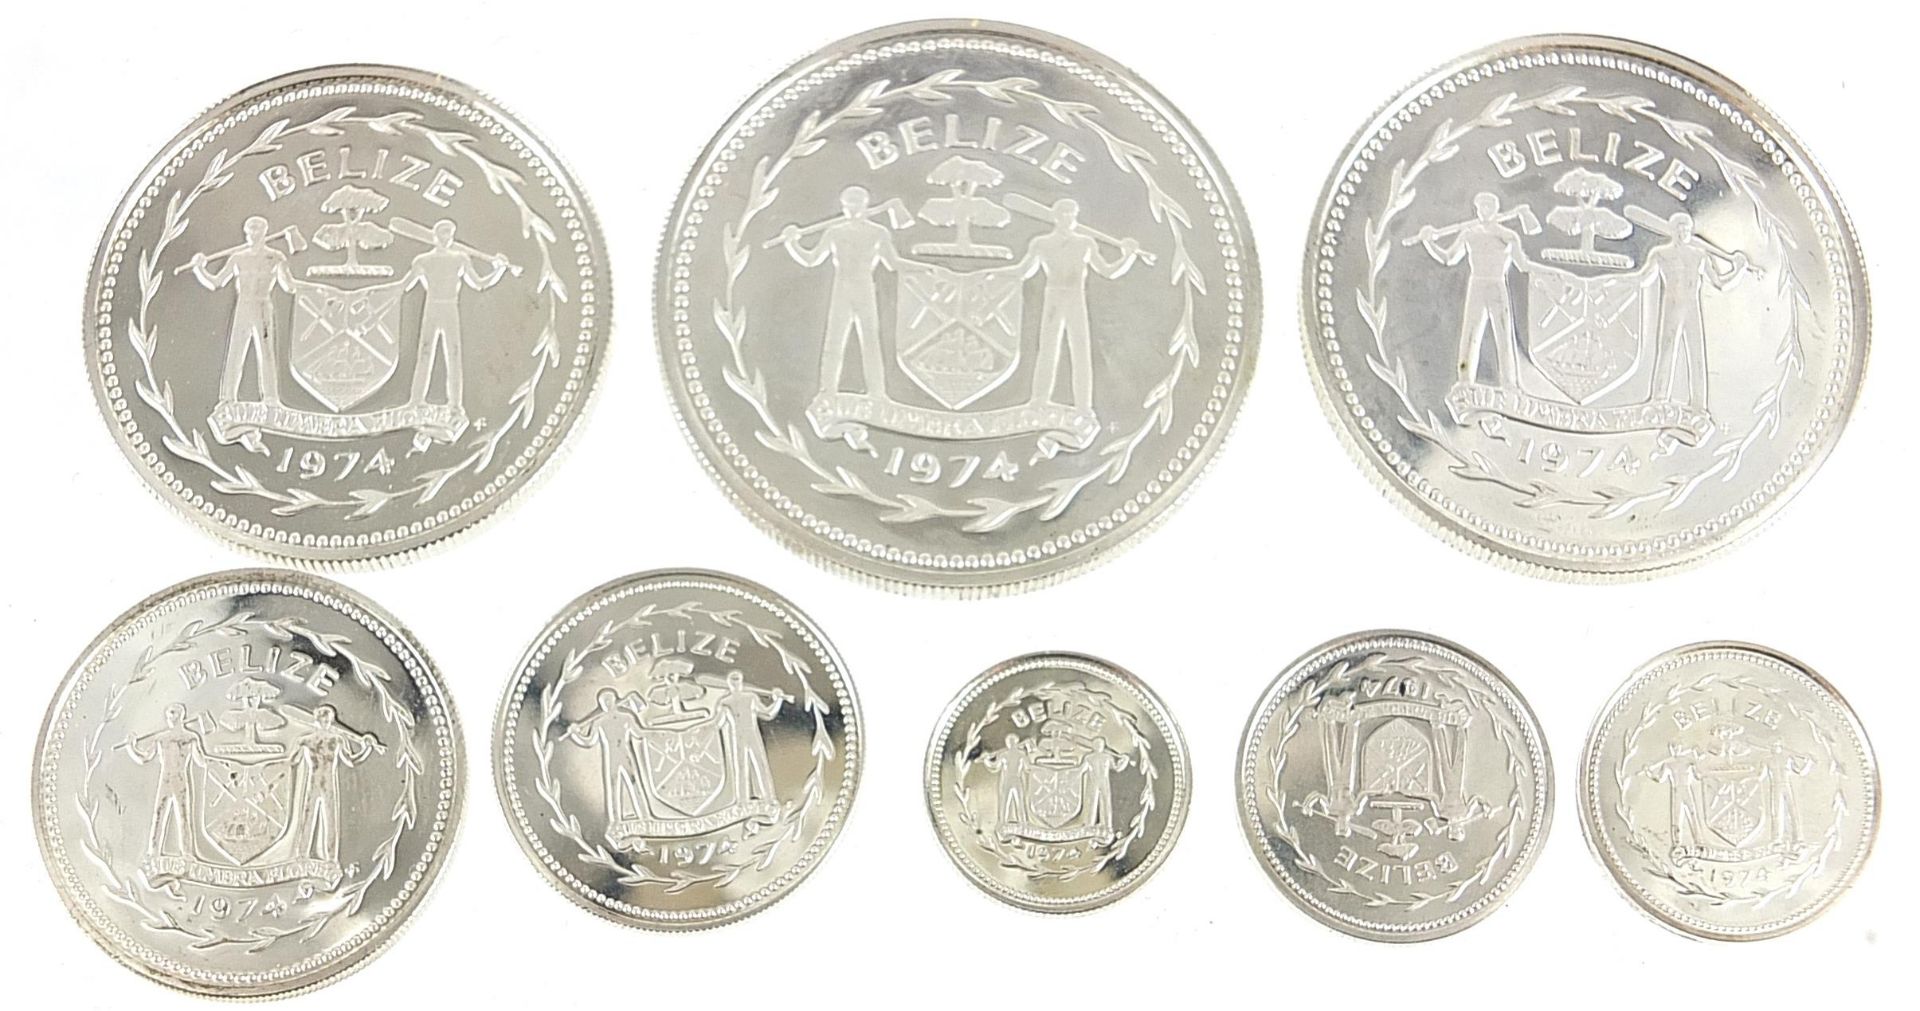 Belize 1974 collector's silver proof set minted at The Franklin Mint, with fitted case, total 102.8g - Image 3 of 4